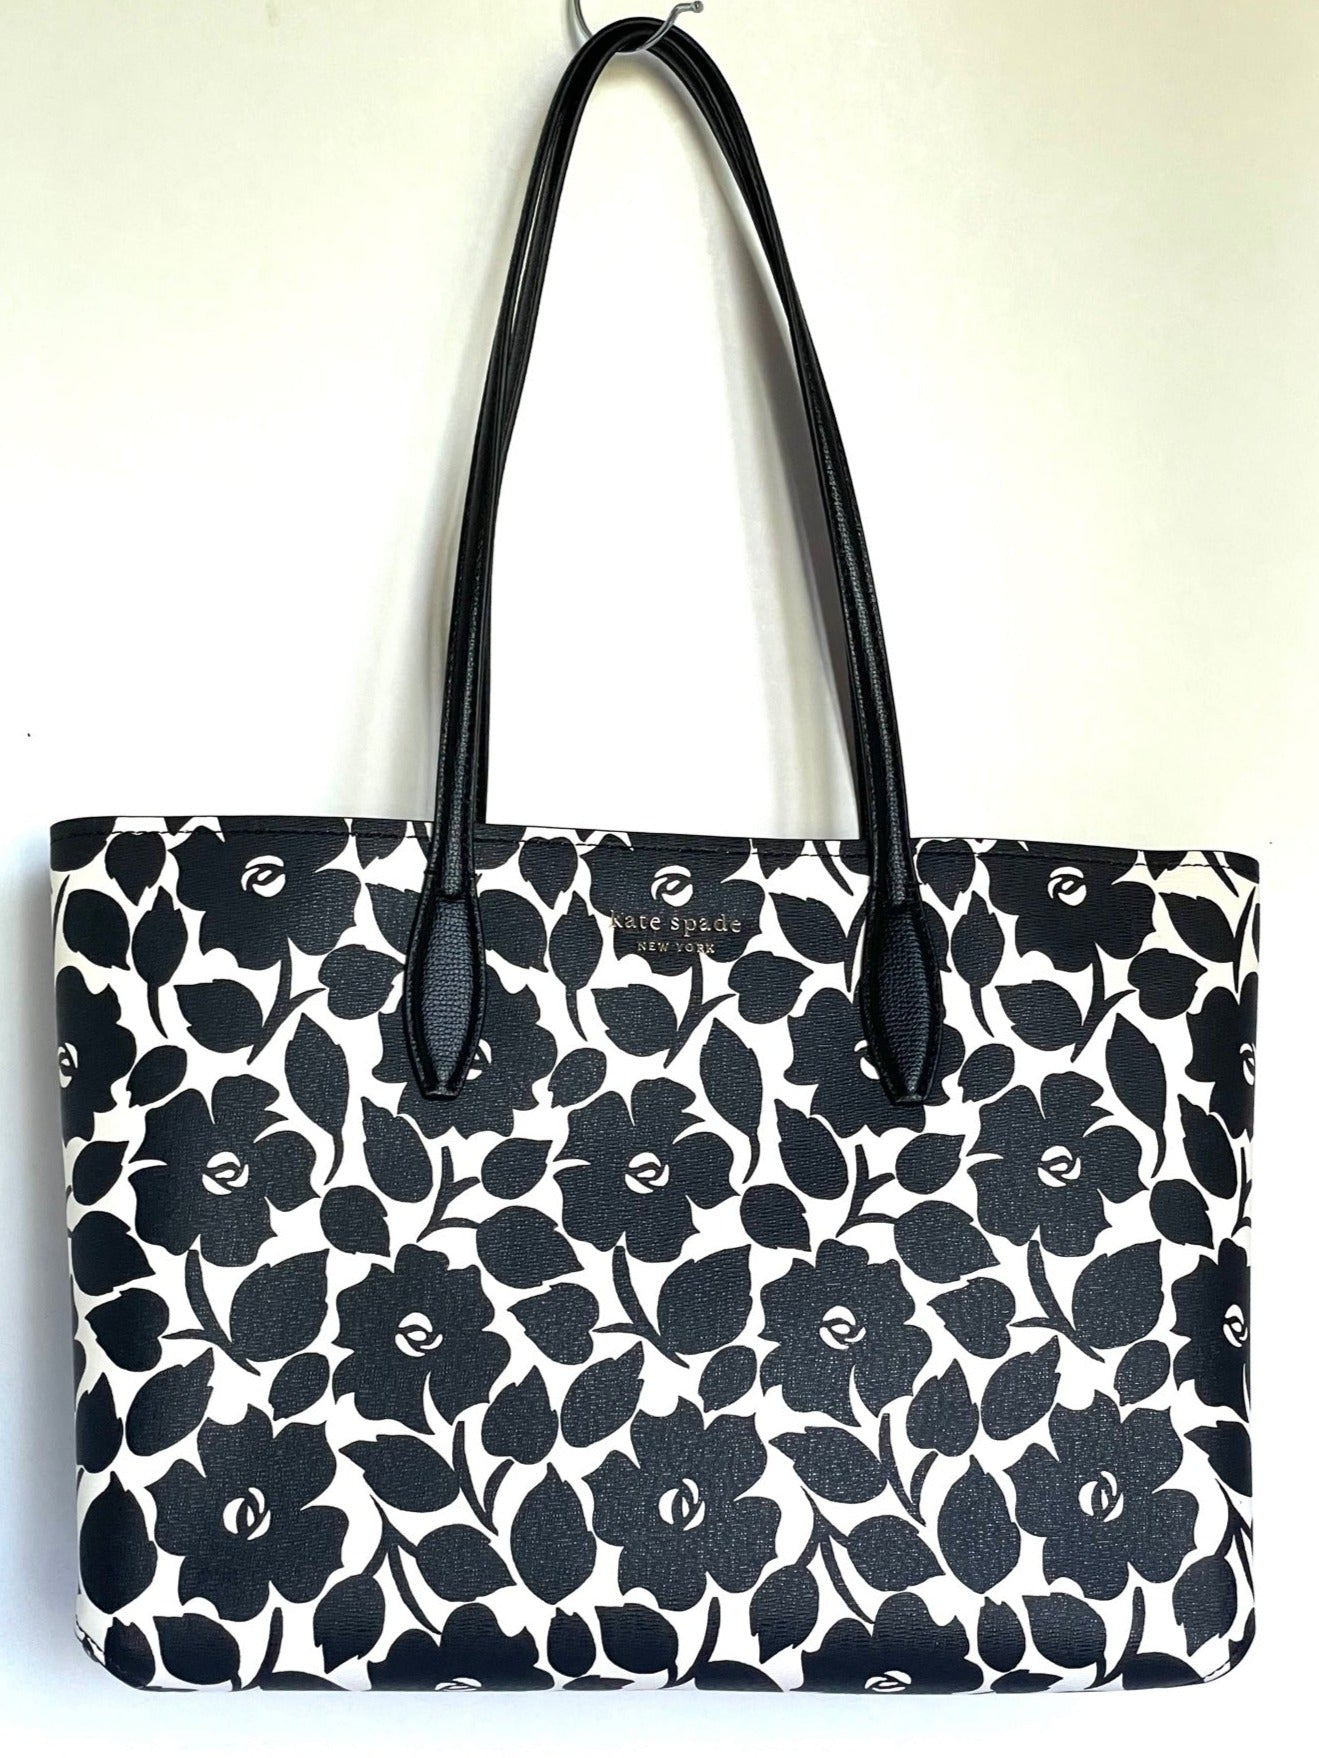 kate spade new york - no matter how much you put inside, our